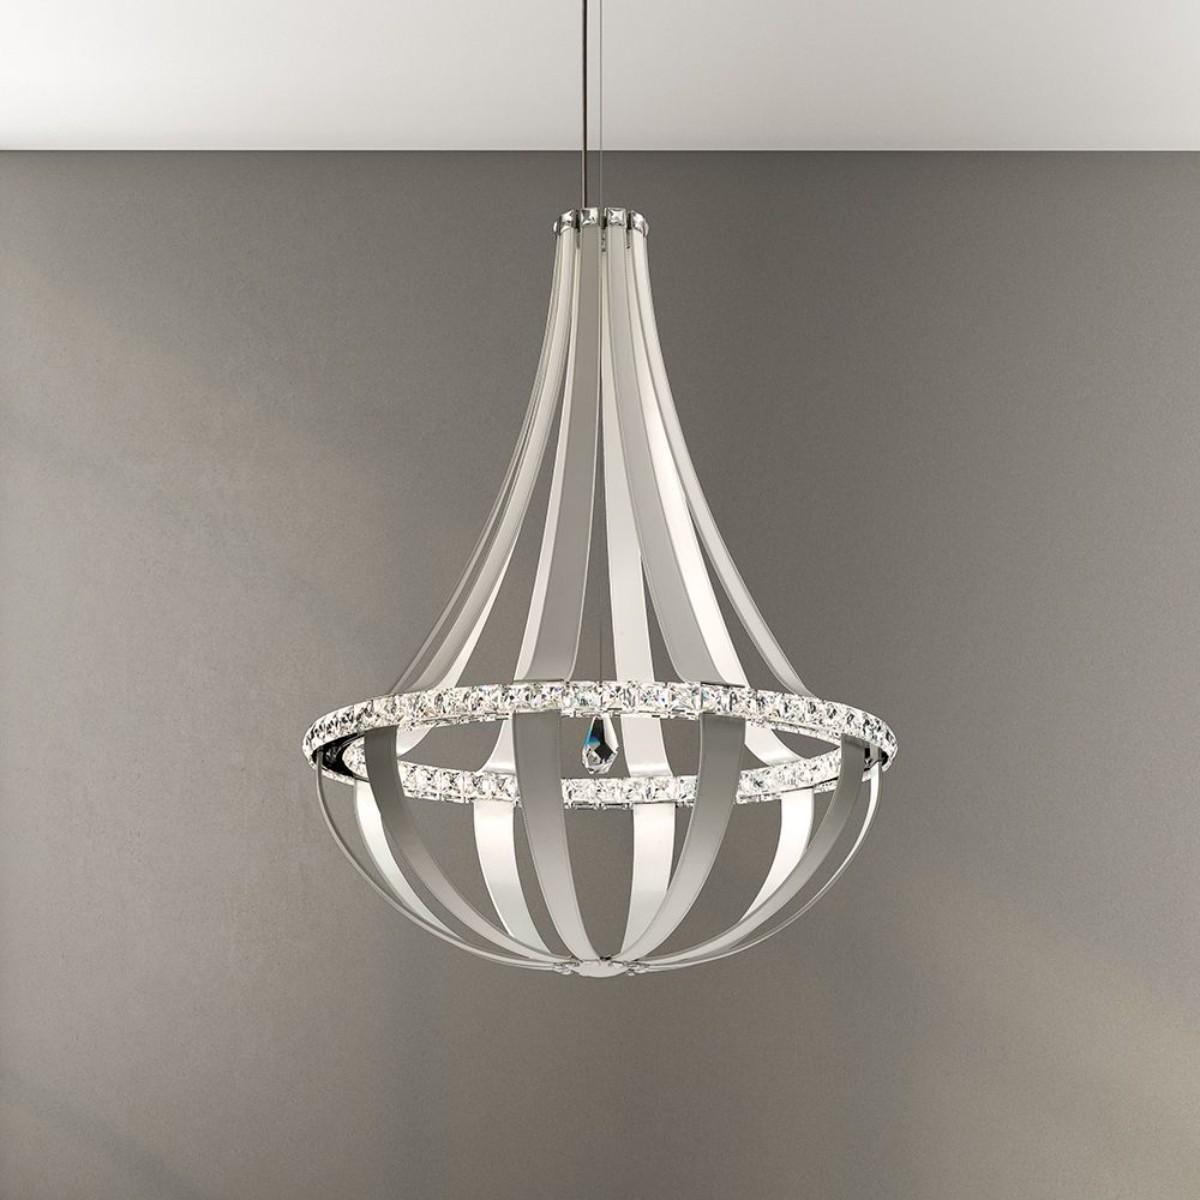 Crystal Empire 45 inch LED Pendant Light with Clear Swarovski Crystals